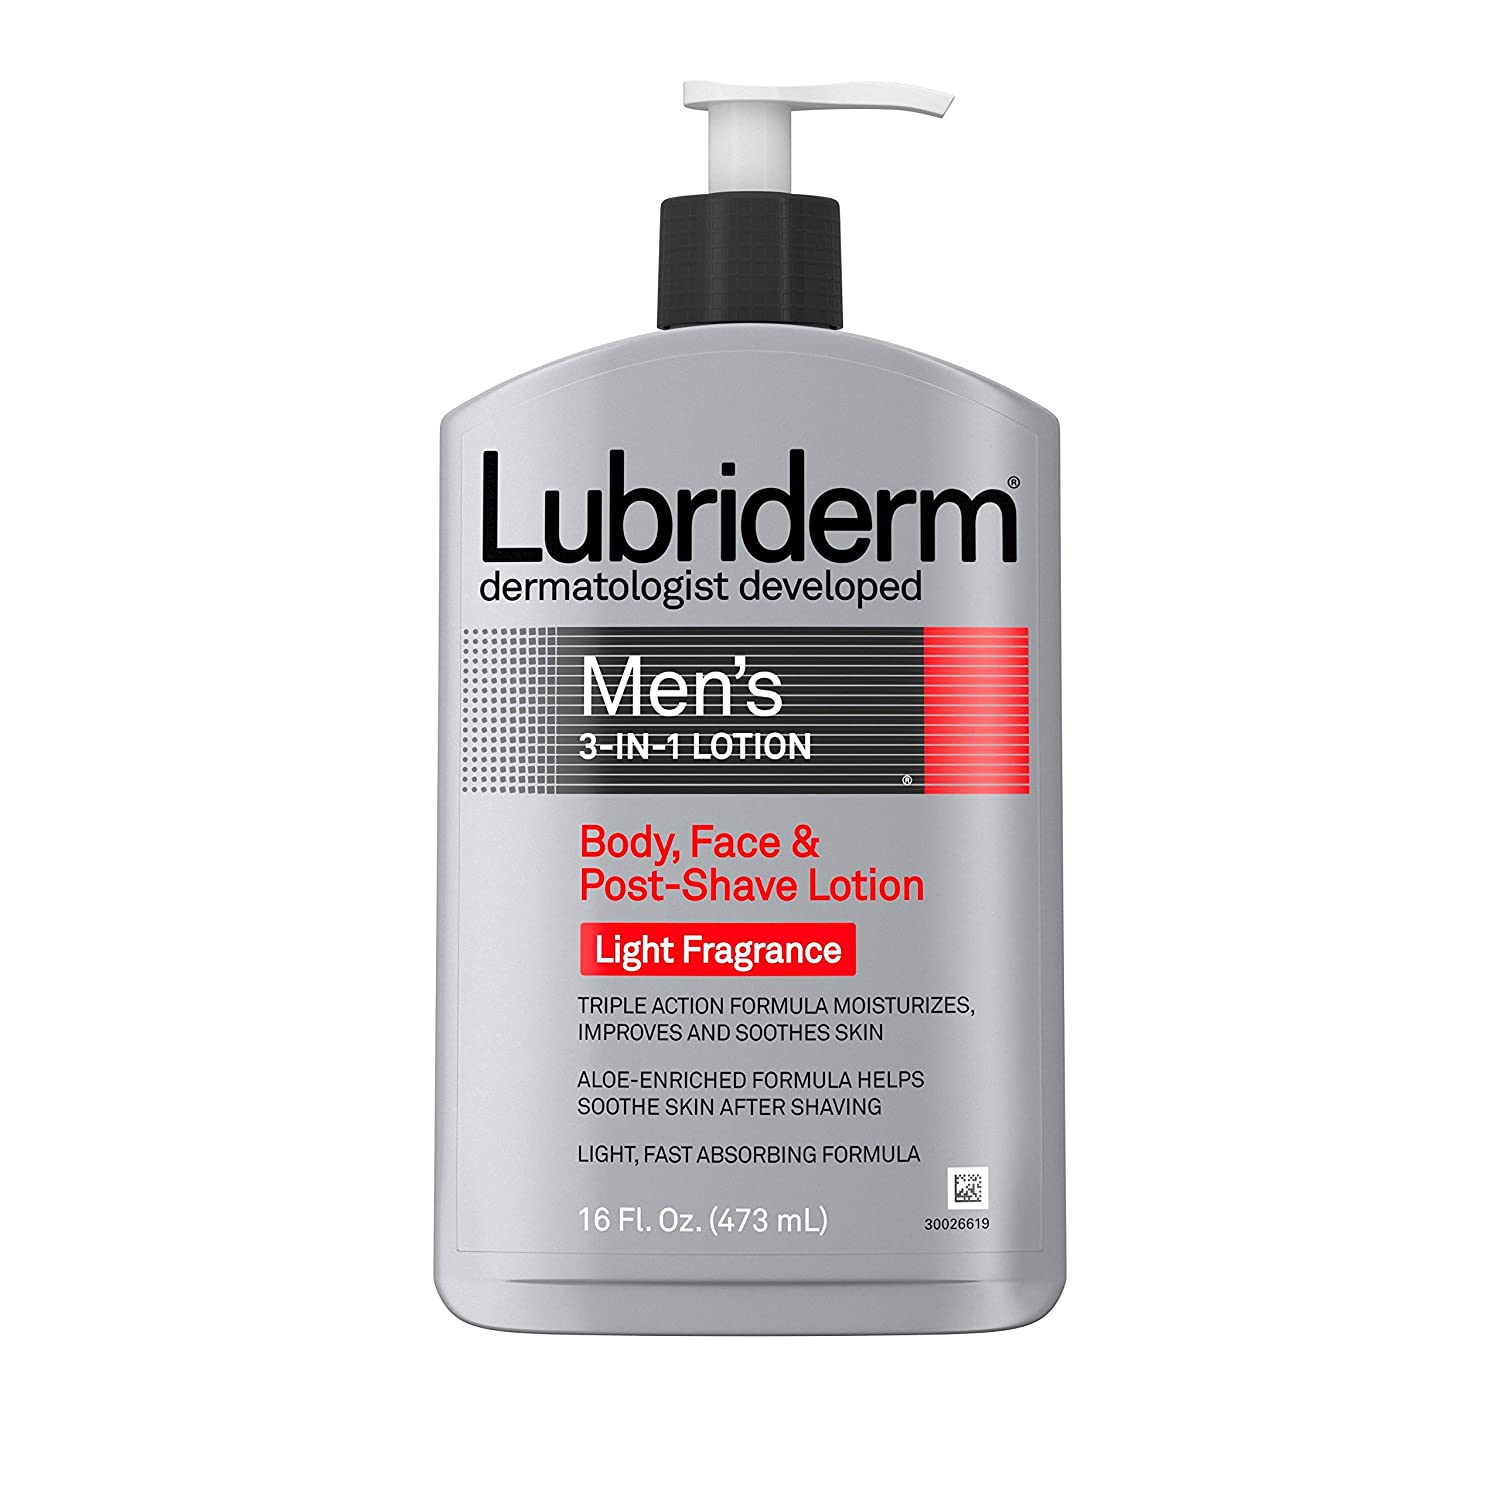 Lubriderm Mens 3 In 1 Lotion Enriched with Aloe for Body and Face